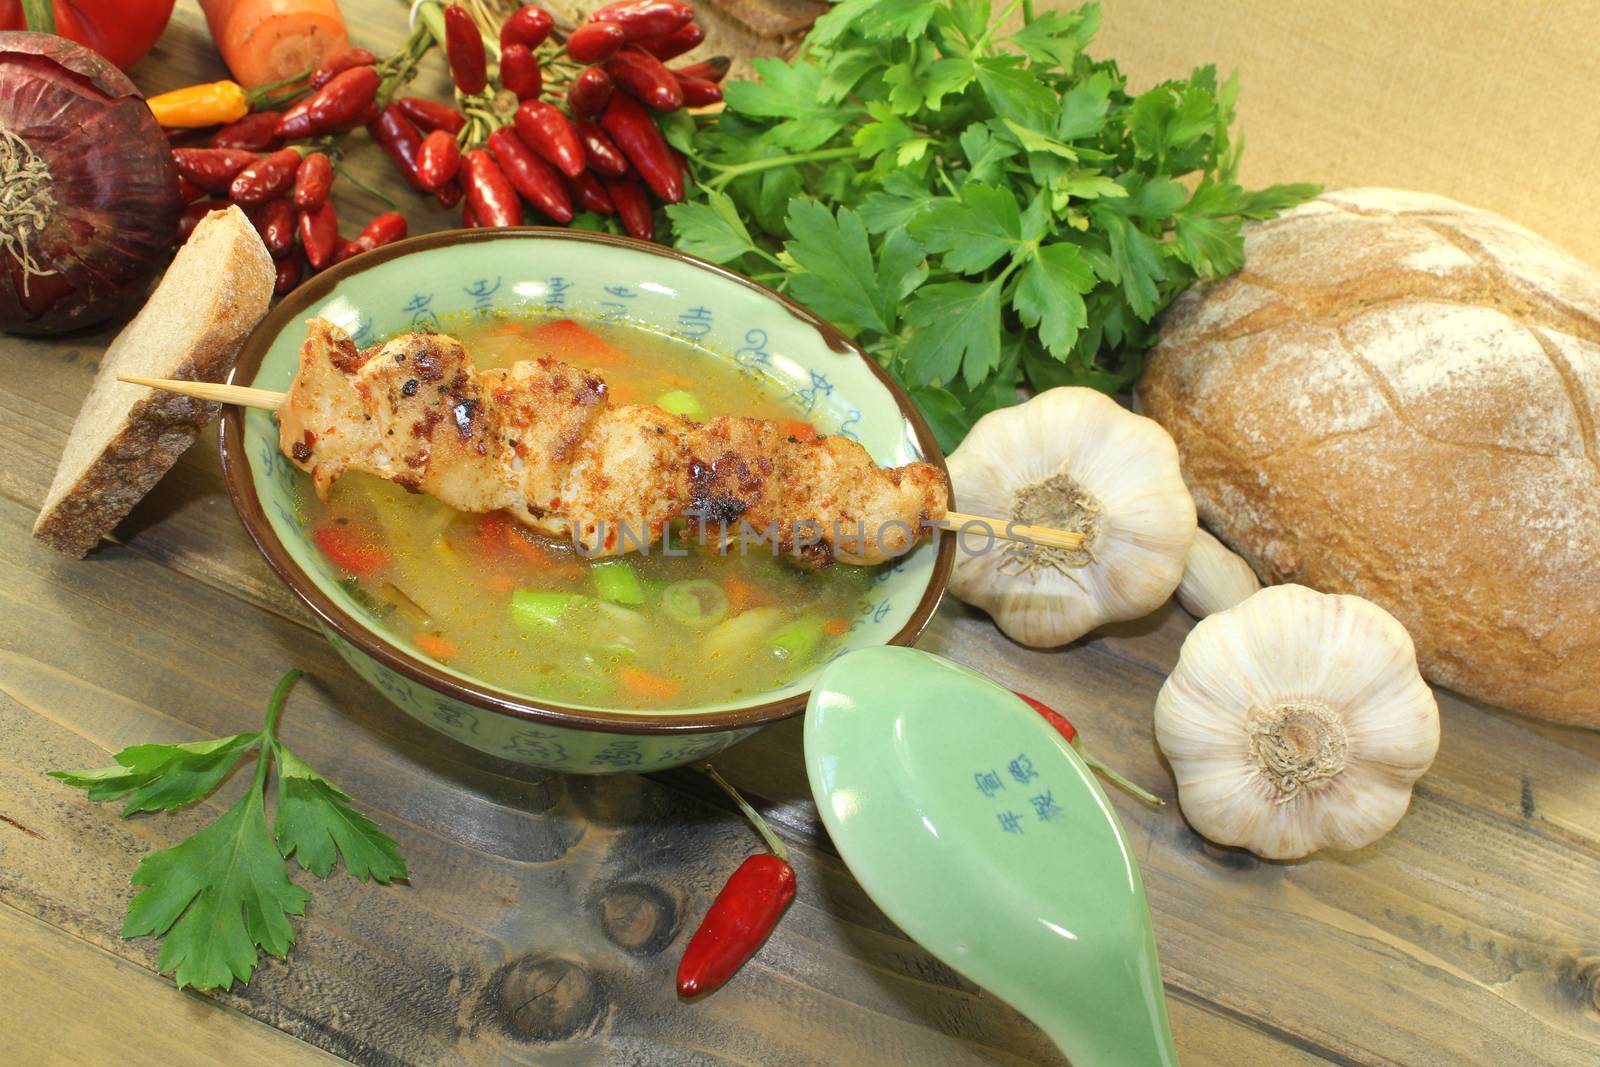 Poultry consomme with chicken skewer and greens by discovery